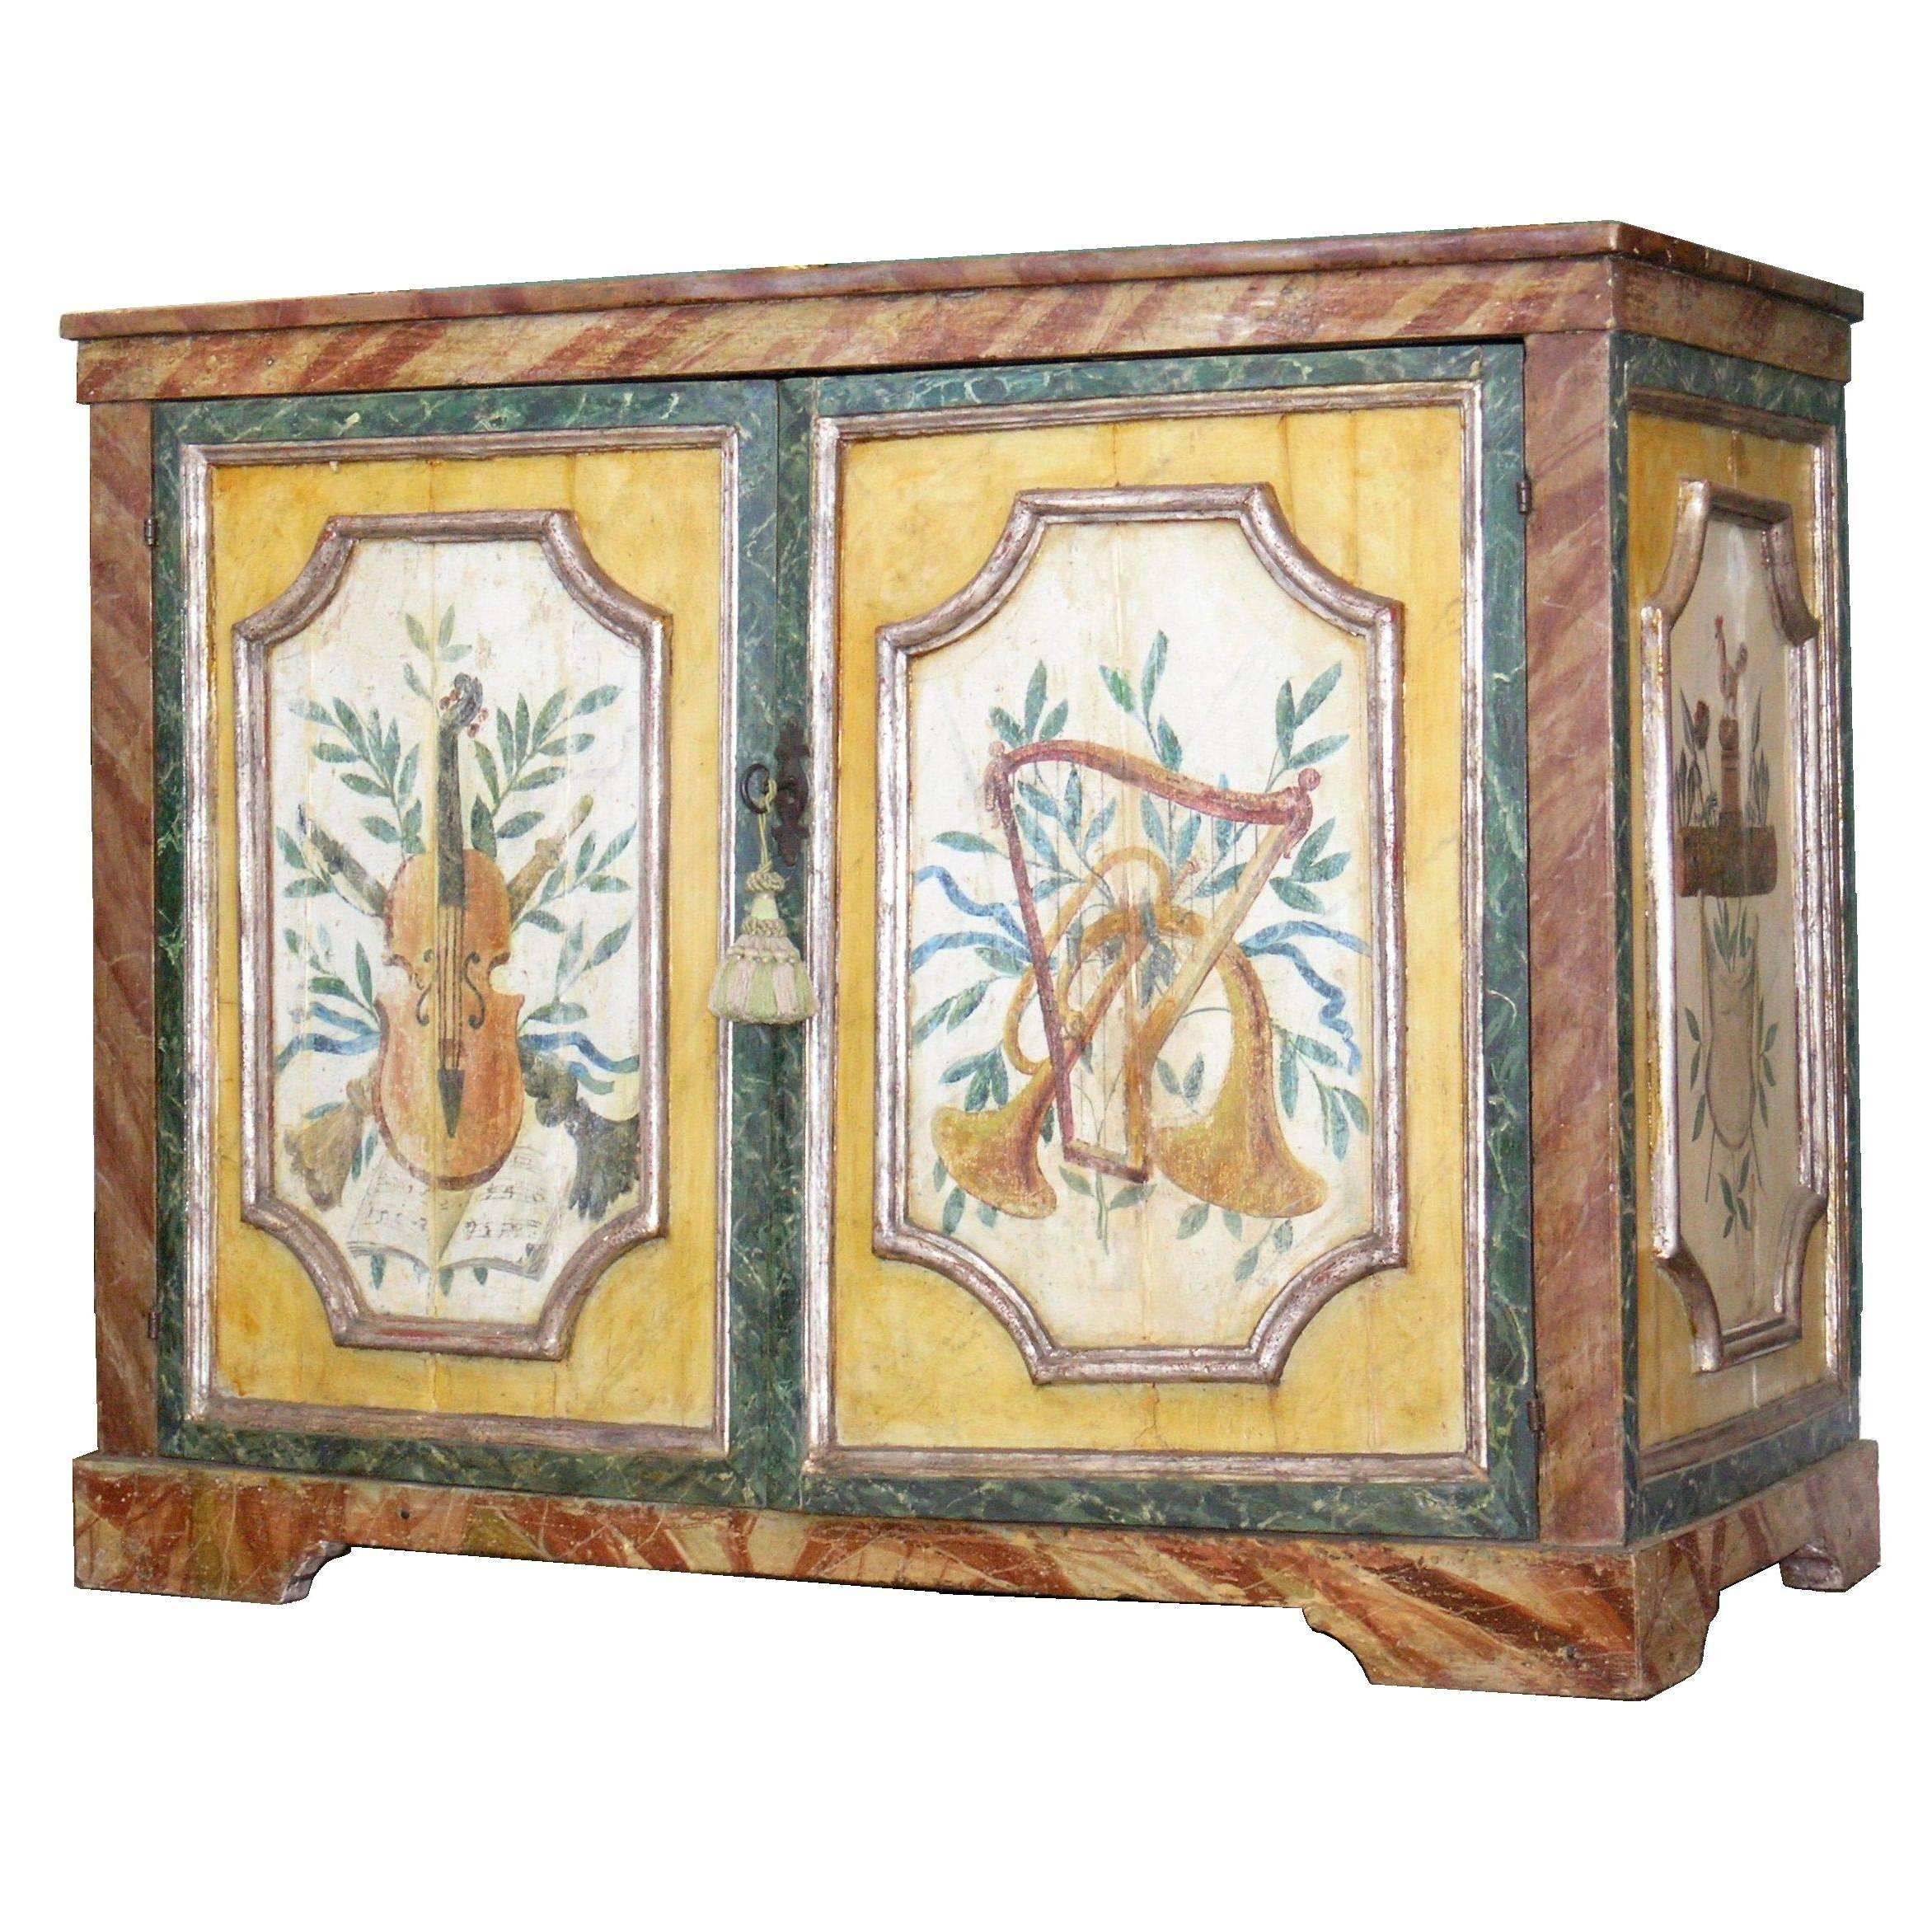  Italian Painted Credenza - 18th Century  For Sale